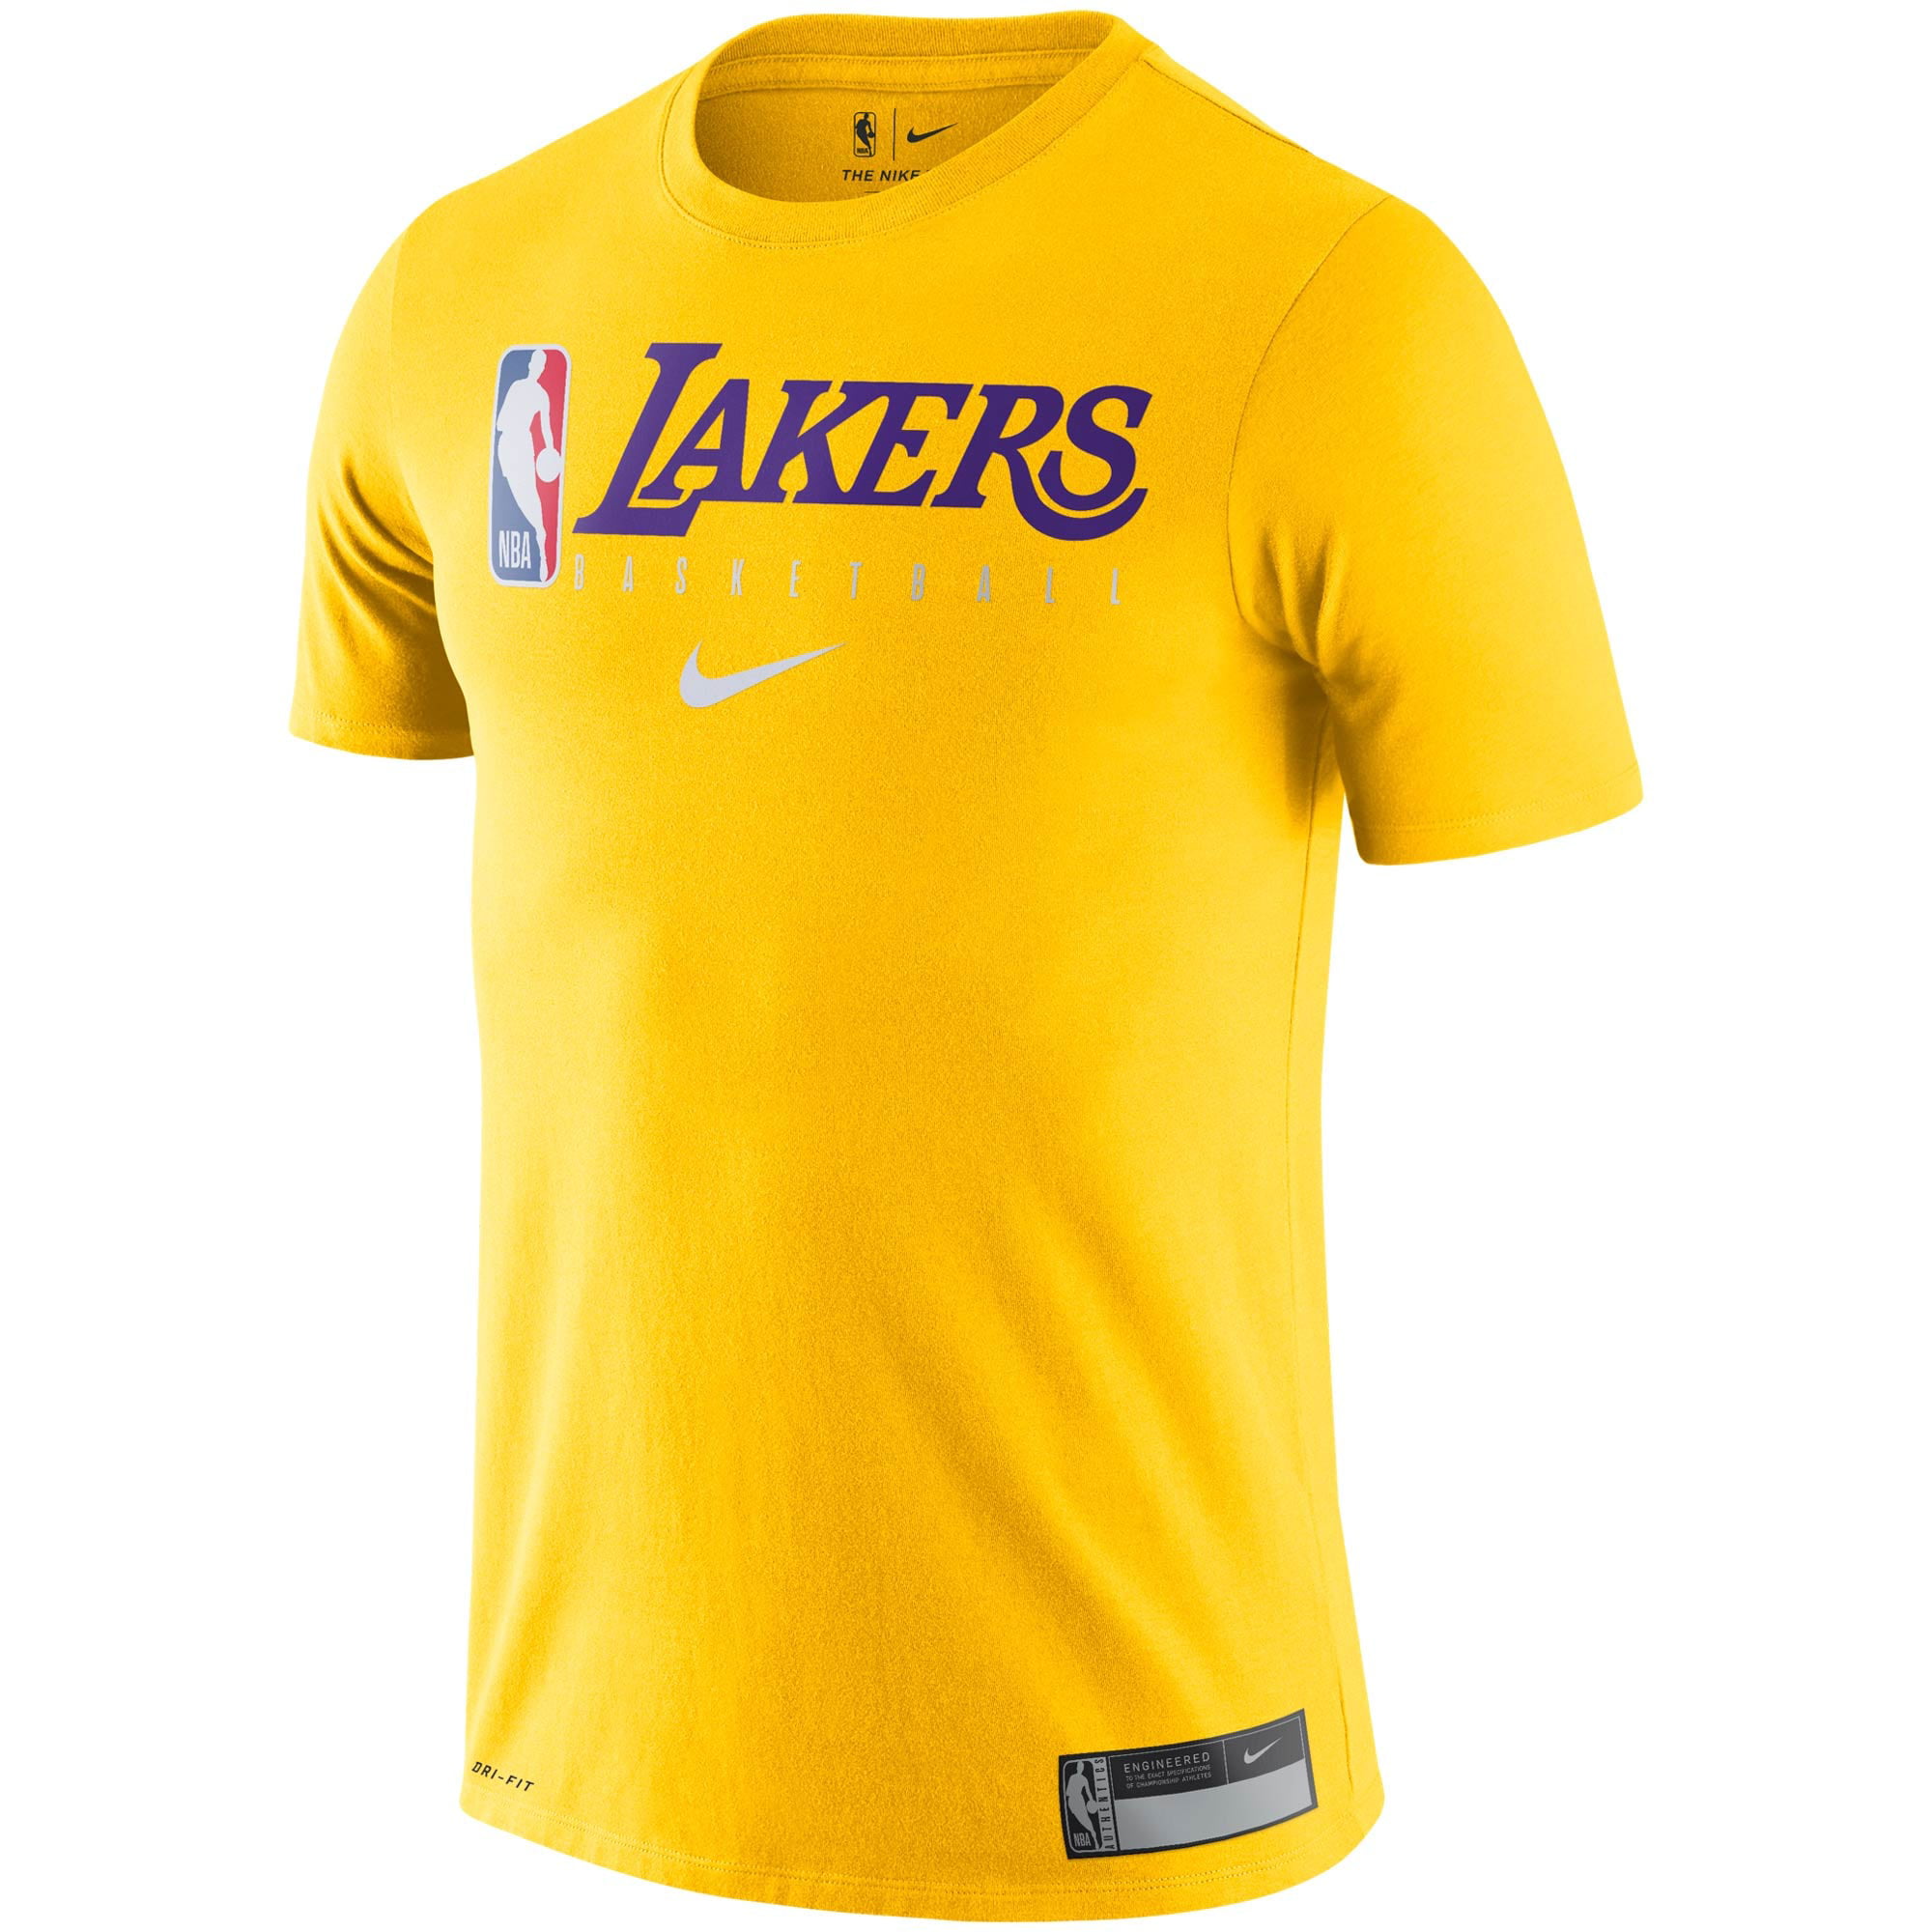 lakers practice jersey nike